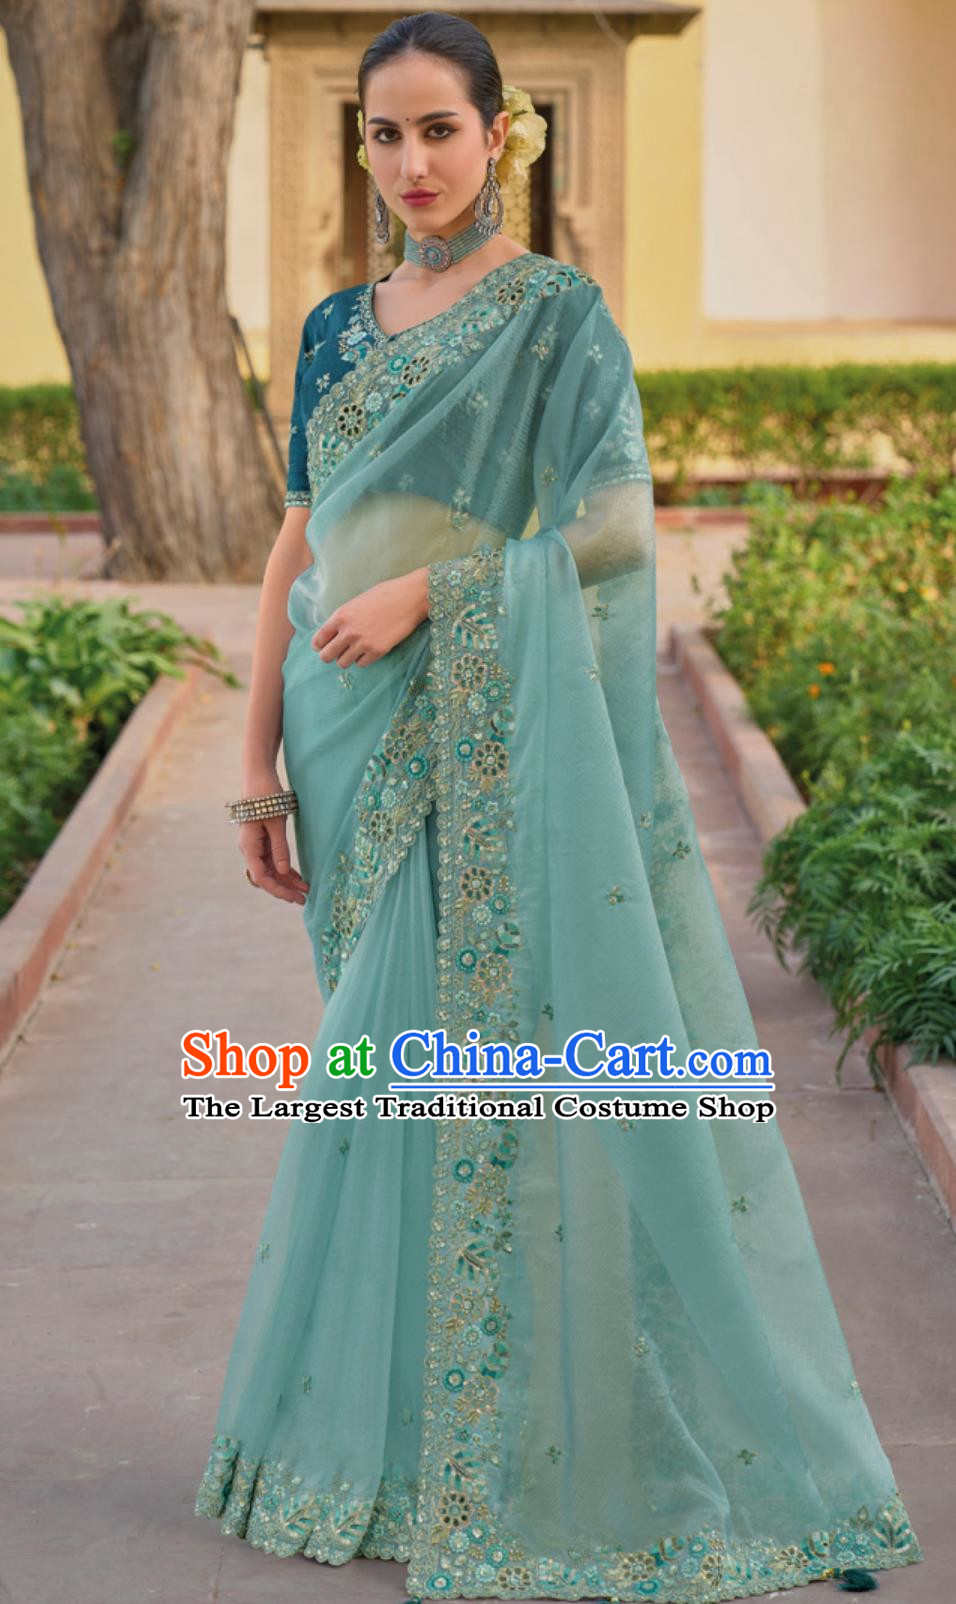 Hollow Embroidery Indian Saree National Ladies Sky Blue Wrap Skirt Sari Festival Party Outfit